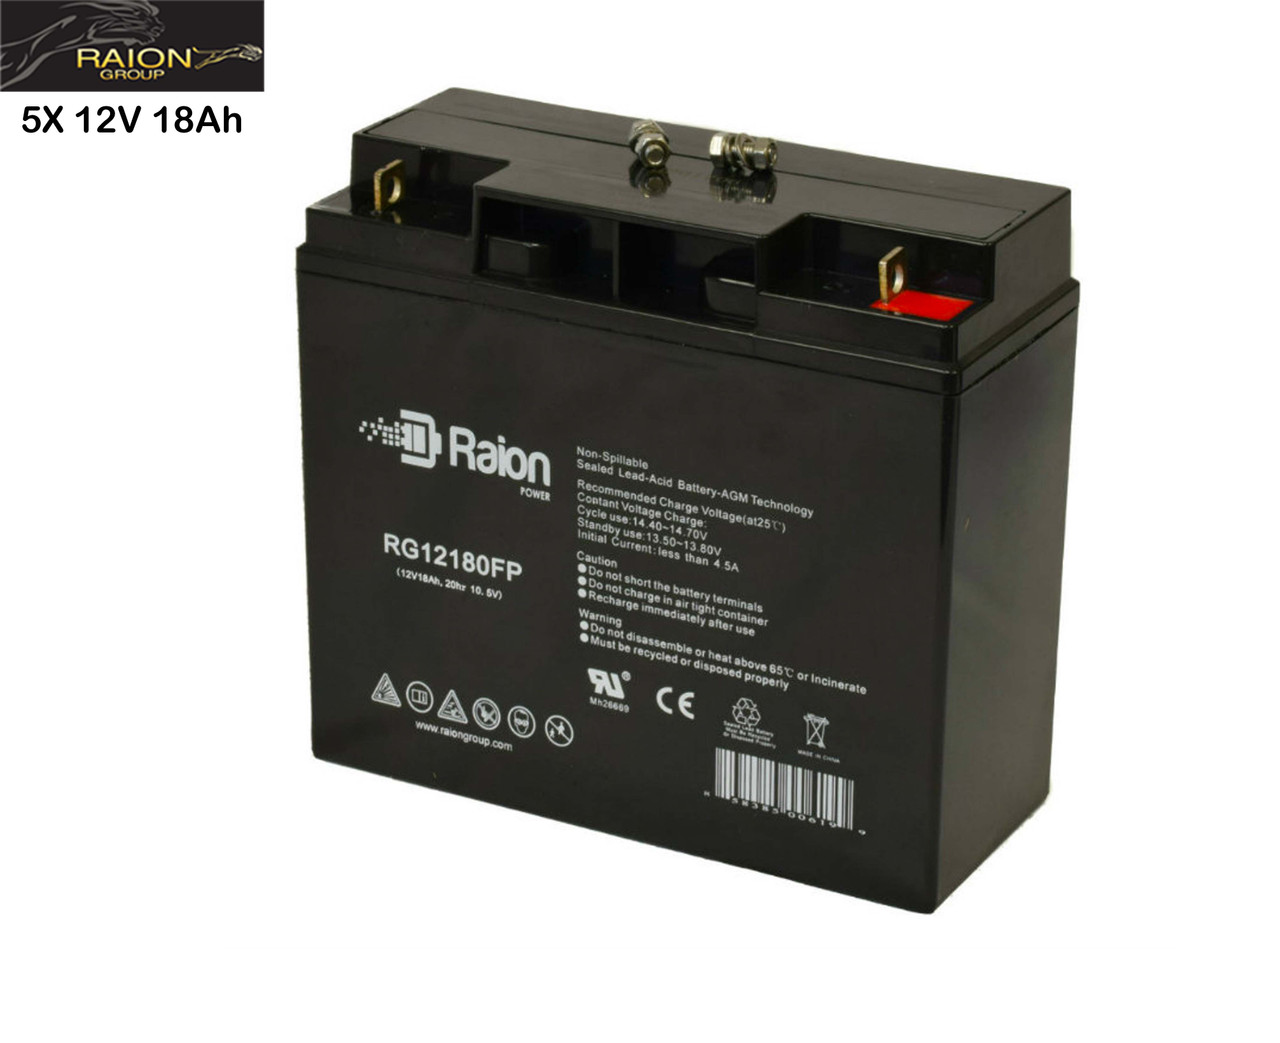 Raion Power Replacement 12V 18Ah Battery for Ecolo ET-3-Commander - 5 Pack